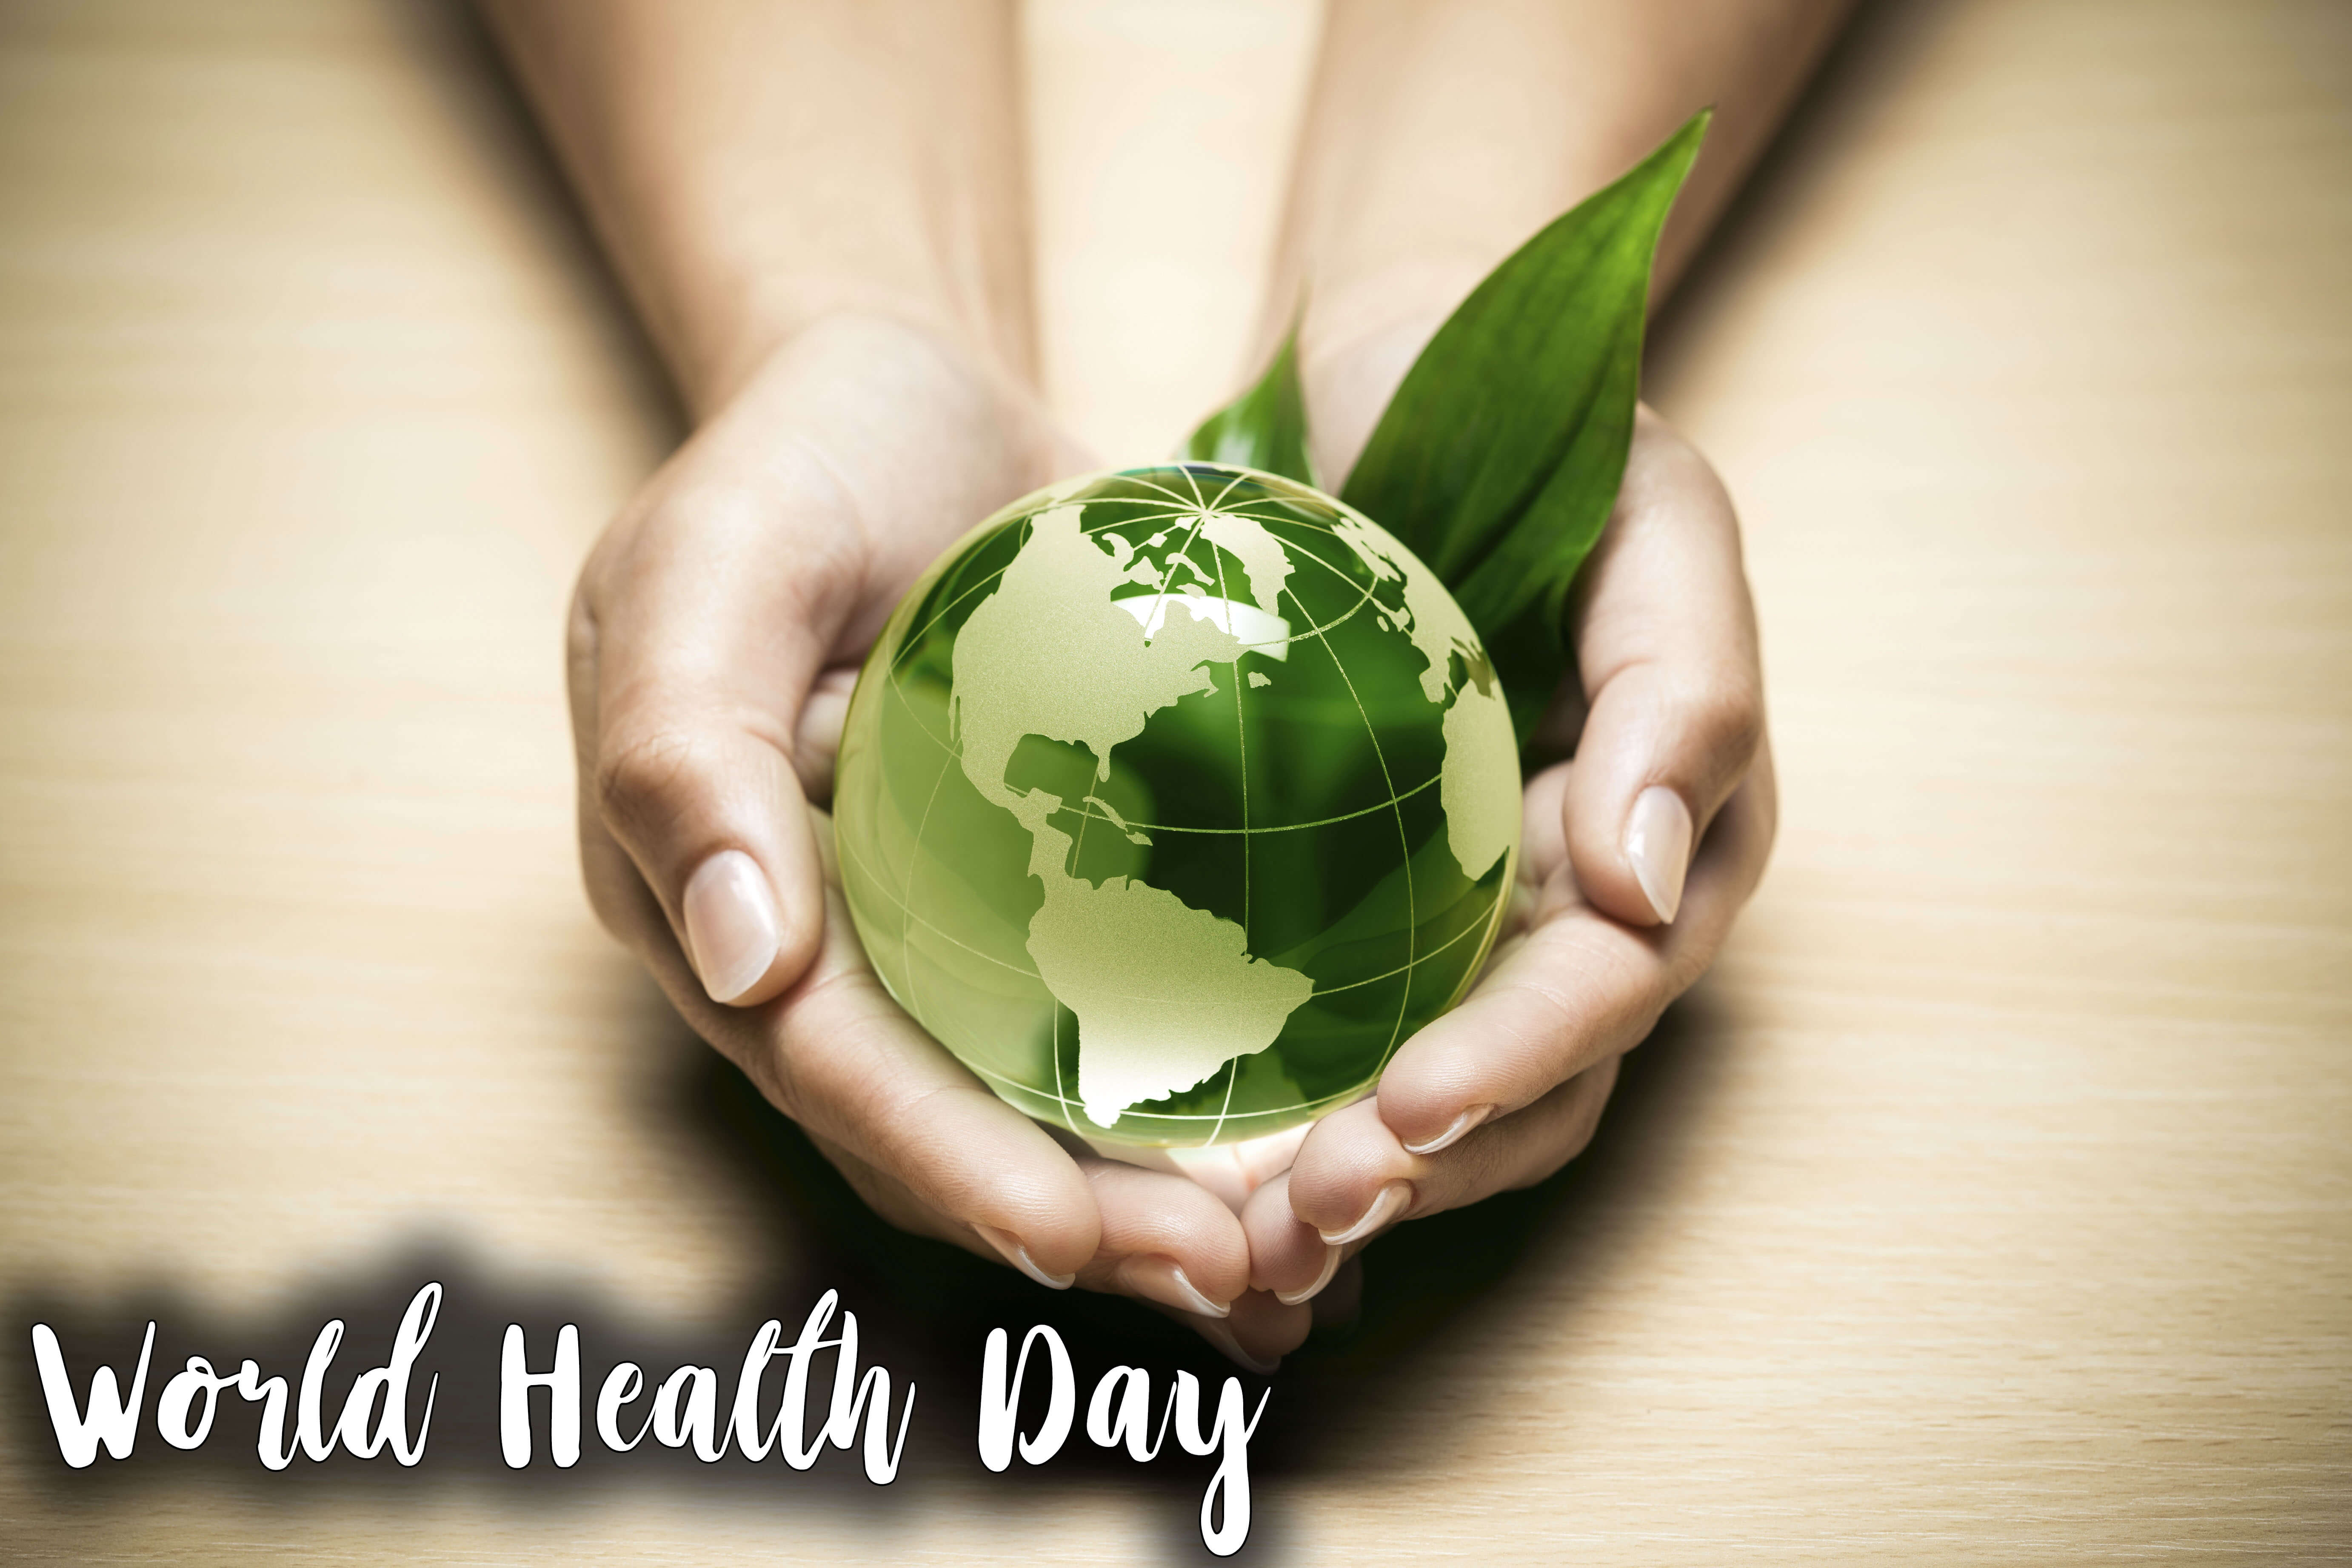 Happy World Health Day Protect Save Globe On Hands - World Health Day Hd , HD Wallpaper & Backgrounds